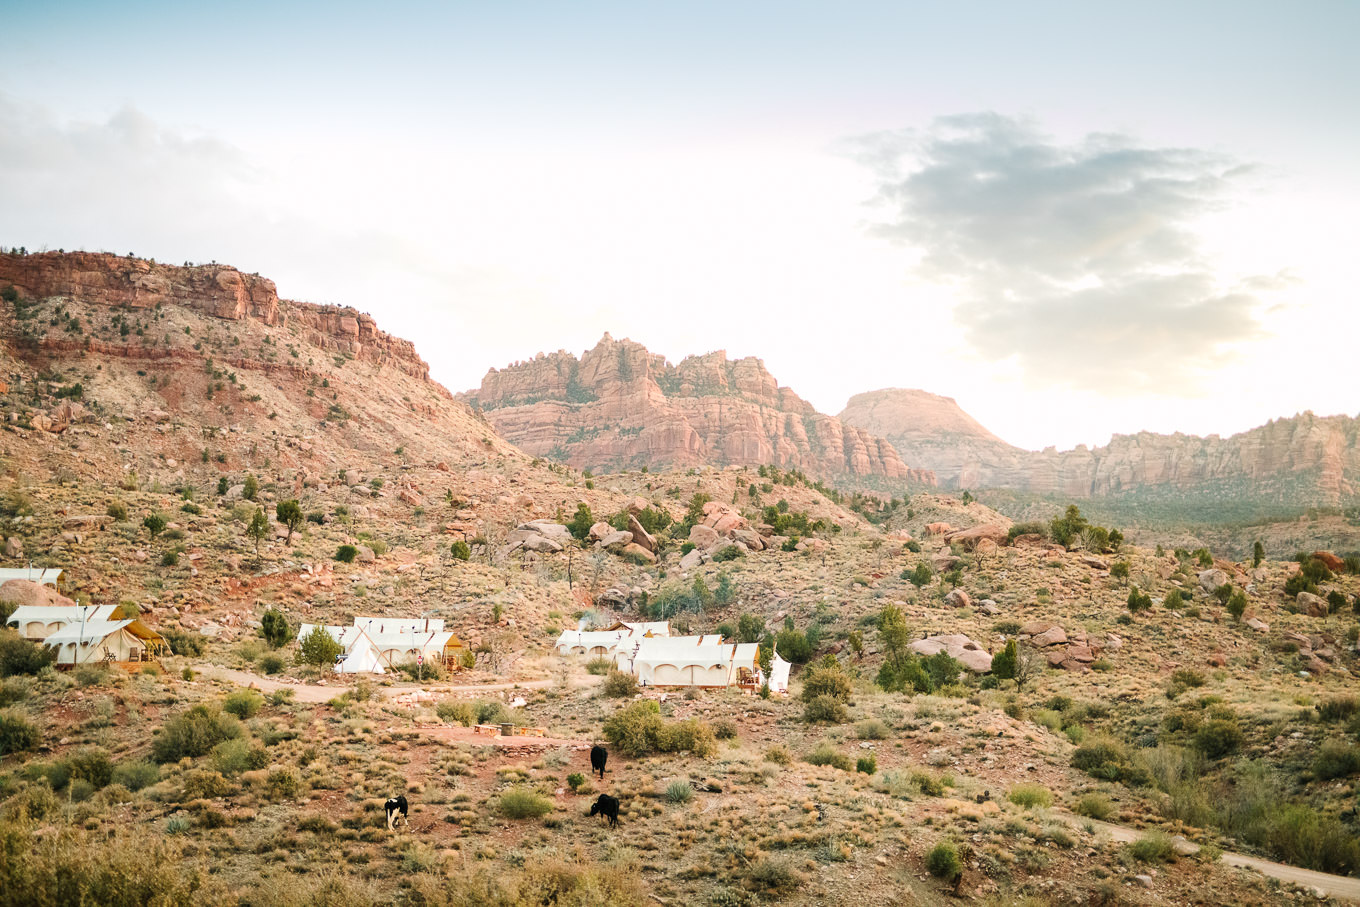 Under Canvas view | Zion Under Canvas Elopement at Sunrise | Colorful adventure elopement photography | #utahelopement #zionelopement #zionwedding #undercanvaszion #sunriseelopement  Source: Mary Costa Photography | Los Angeles